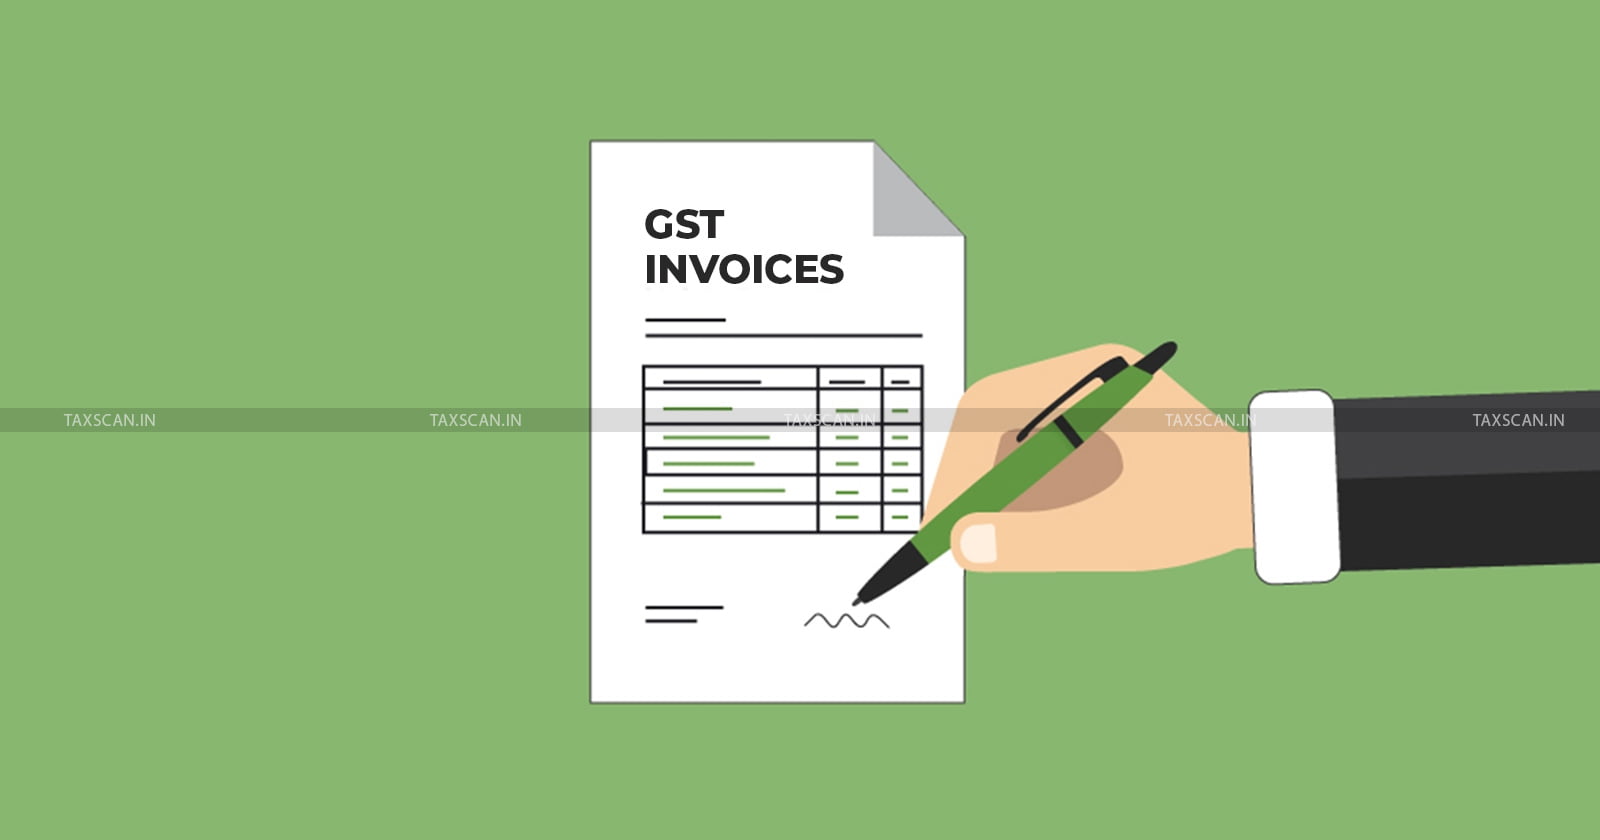 GSTN issues Advisory on Time Limit for Reporting GST Invoices on IRP Portal